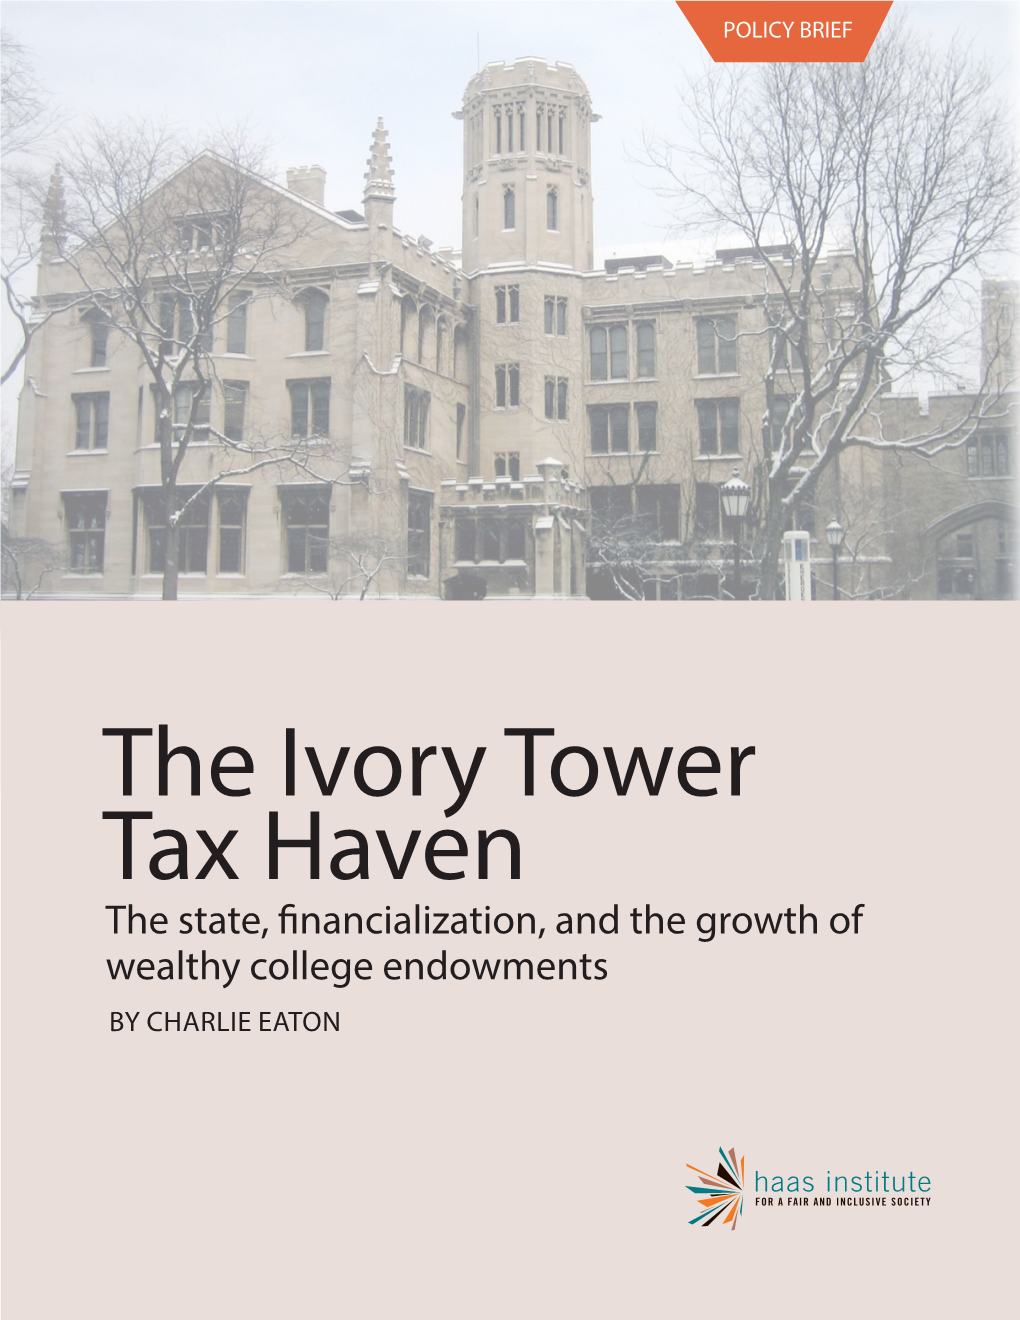 The Ivory Tower Tax Haven the State, Financialization, and the Growth of Wealthy College Endowments by CHARLIE EATON the Papermuchstronger